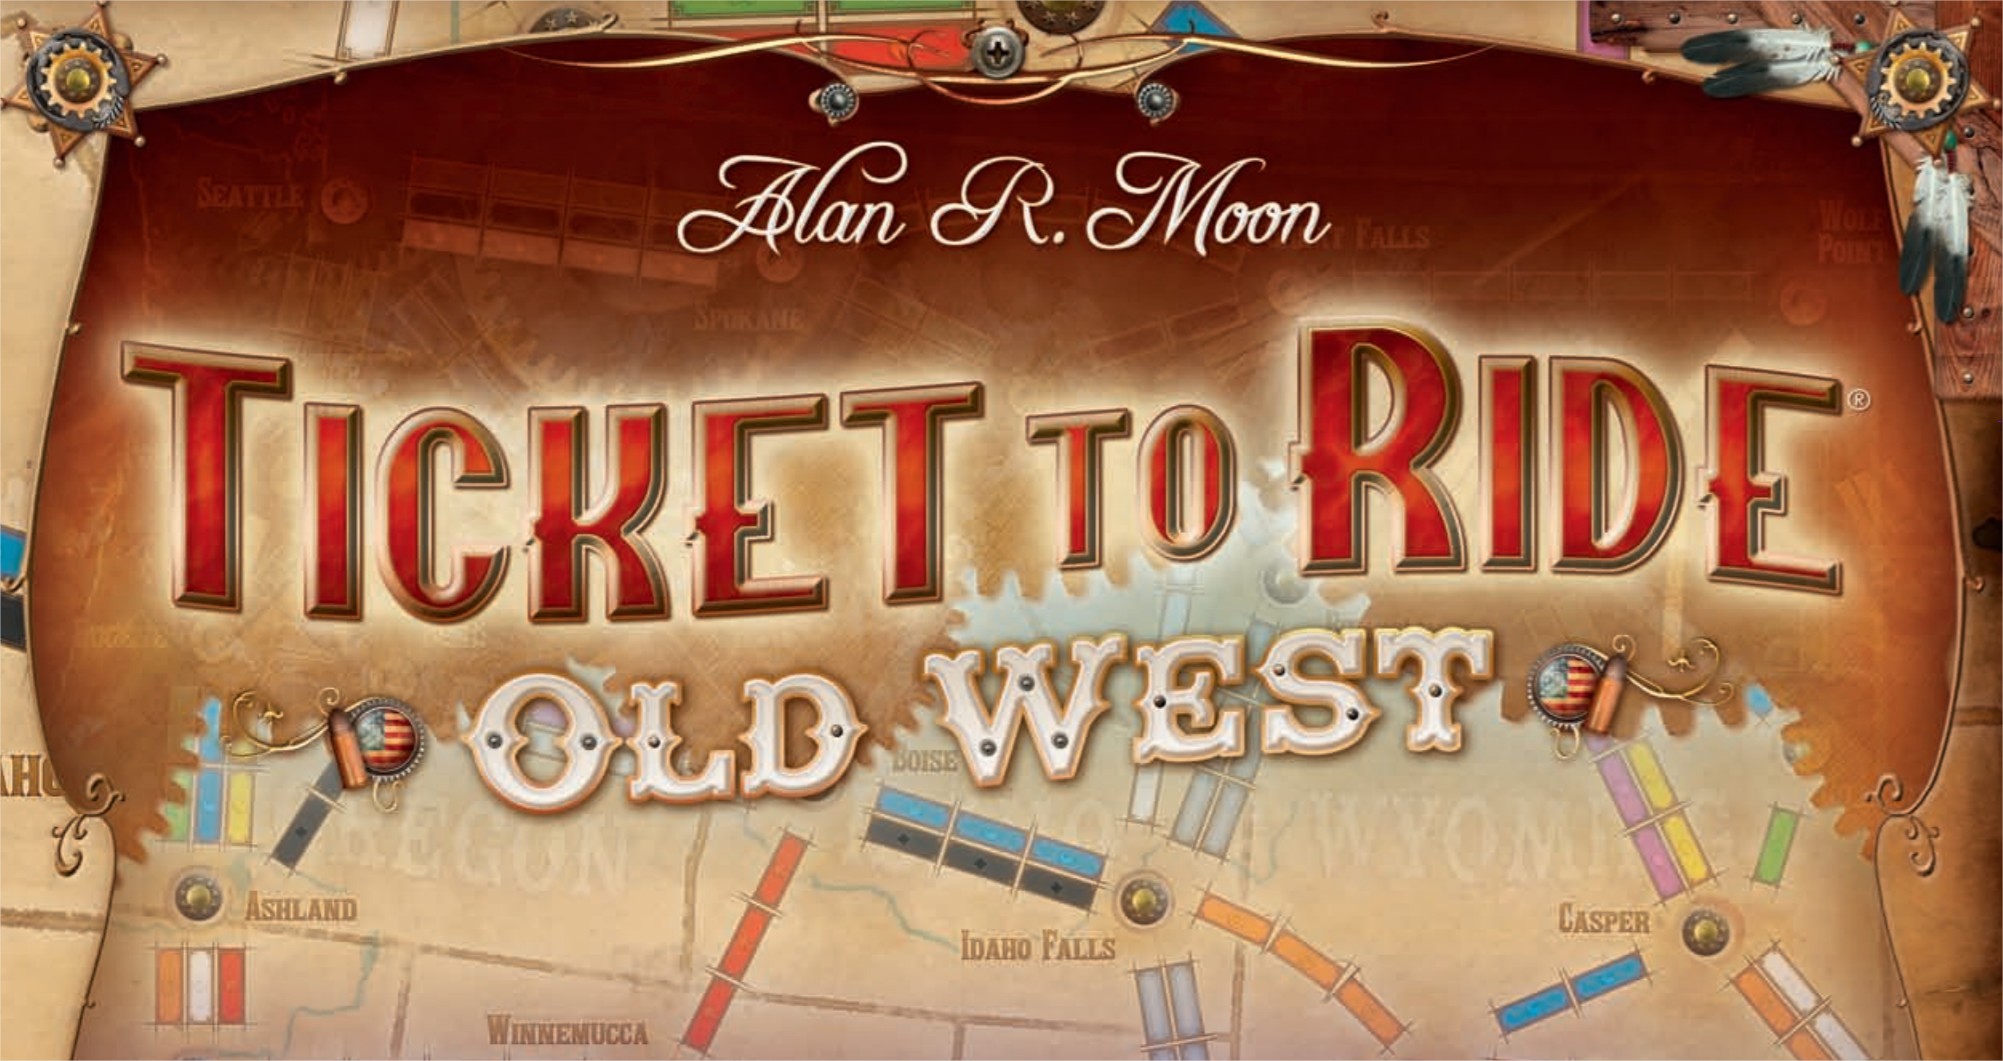 Ticket to Ride Old West